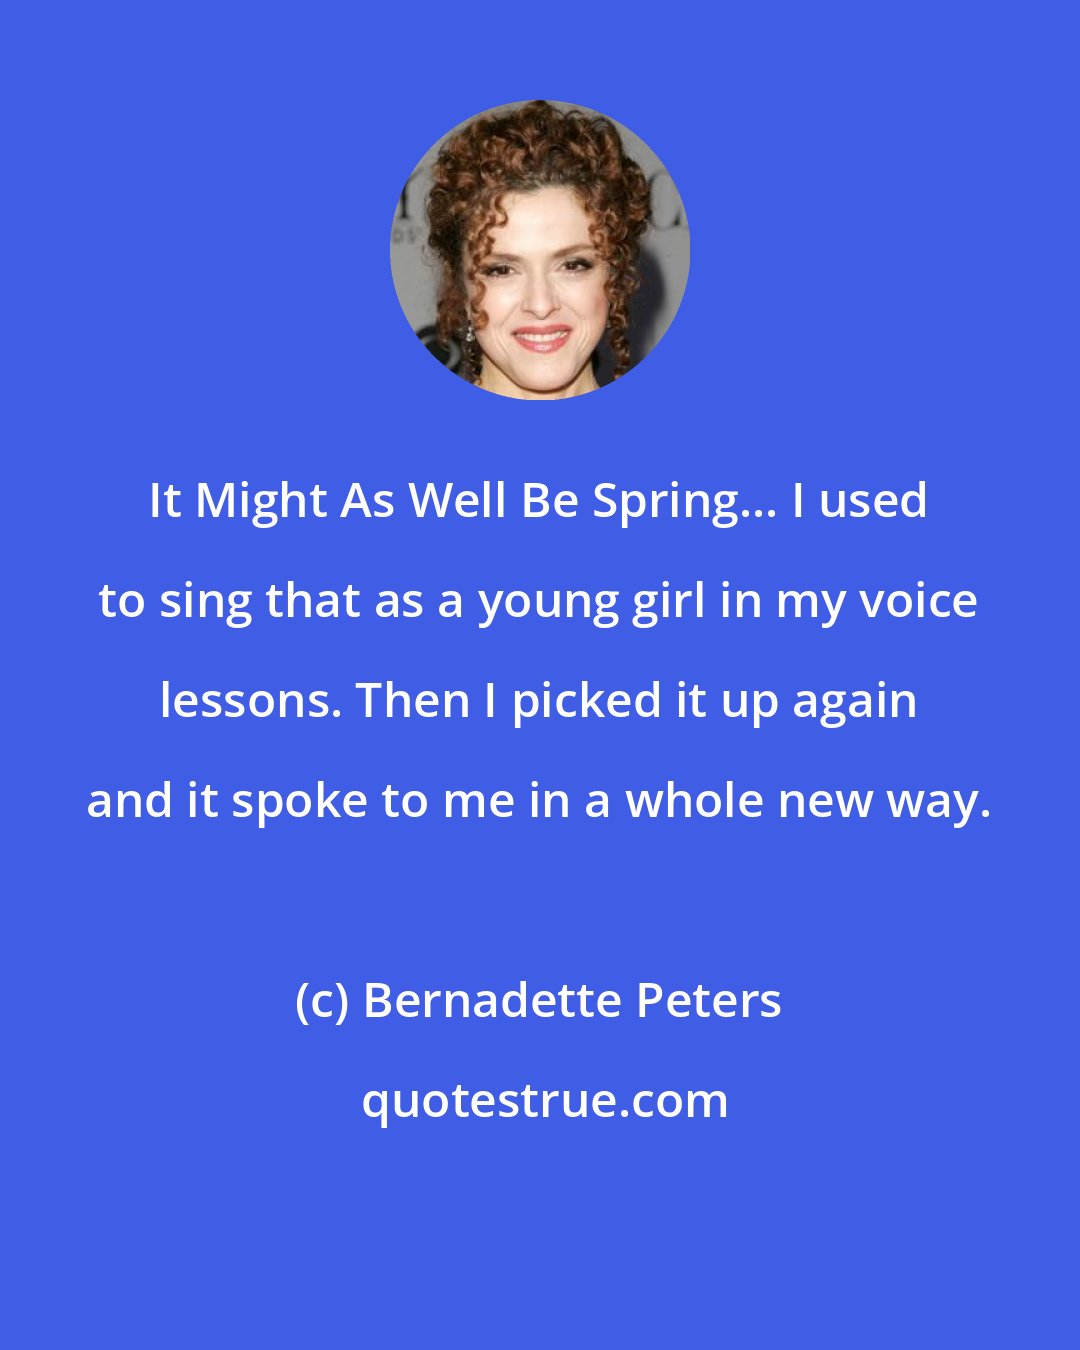 Bernadette Peters: It Might As Well Be Spring... I used to sing that as a young girl in my voice lessons. Then I picked it up again and it spoke to me in a whole new way.